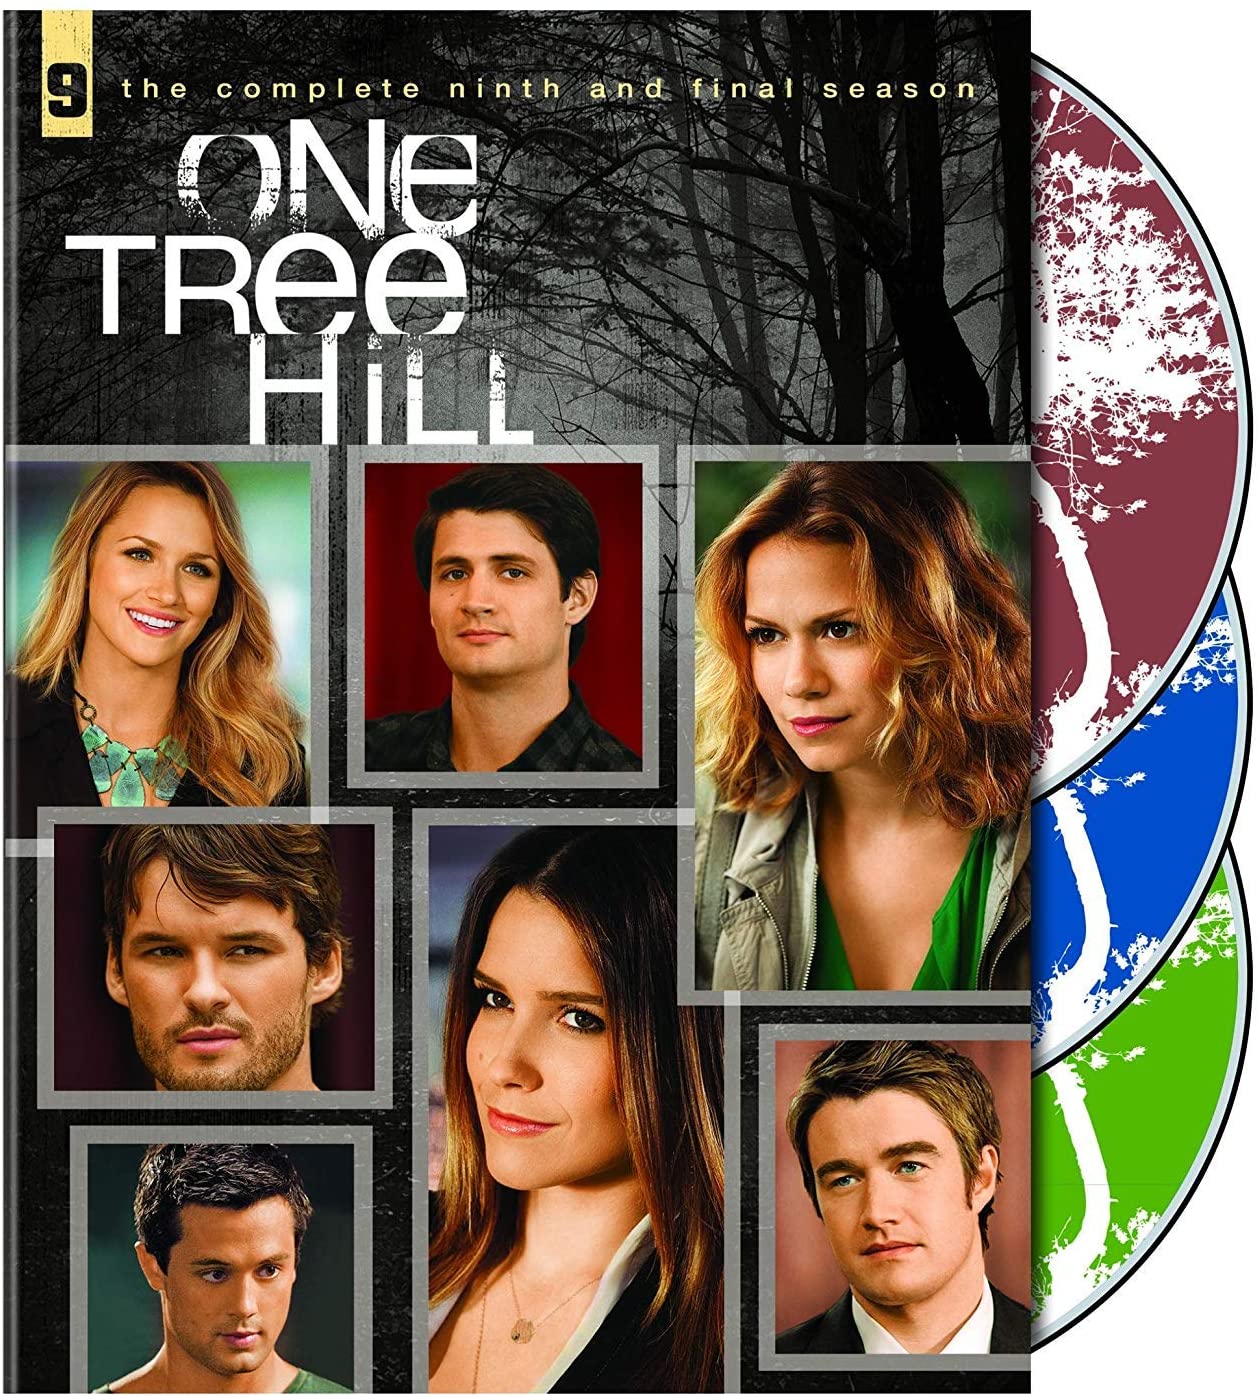 ORIGINAL DVD of One Tree Hill: Complete DVD seasons 1-9 - e4cents